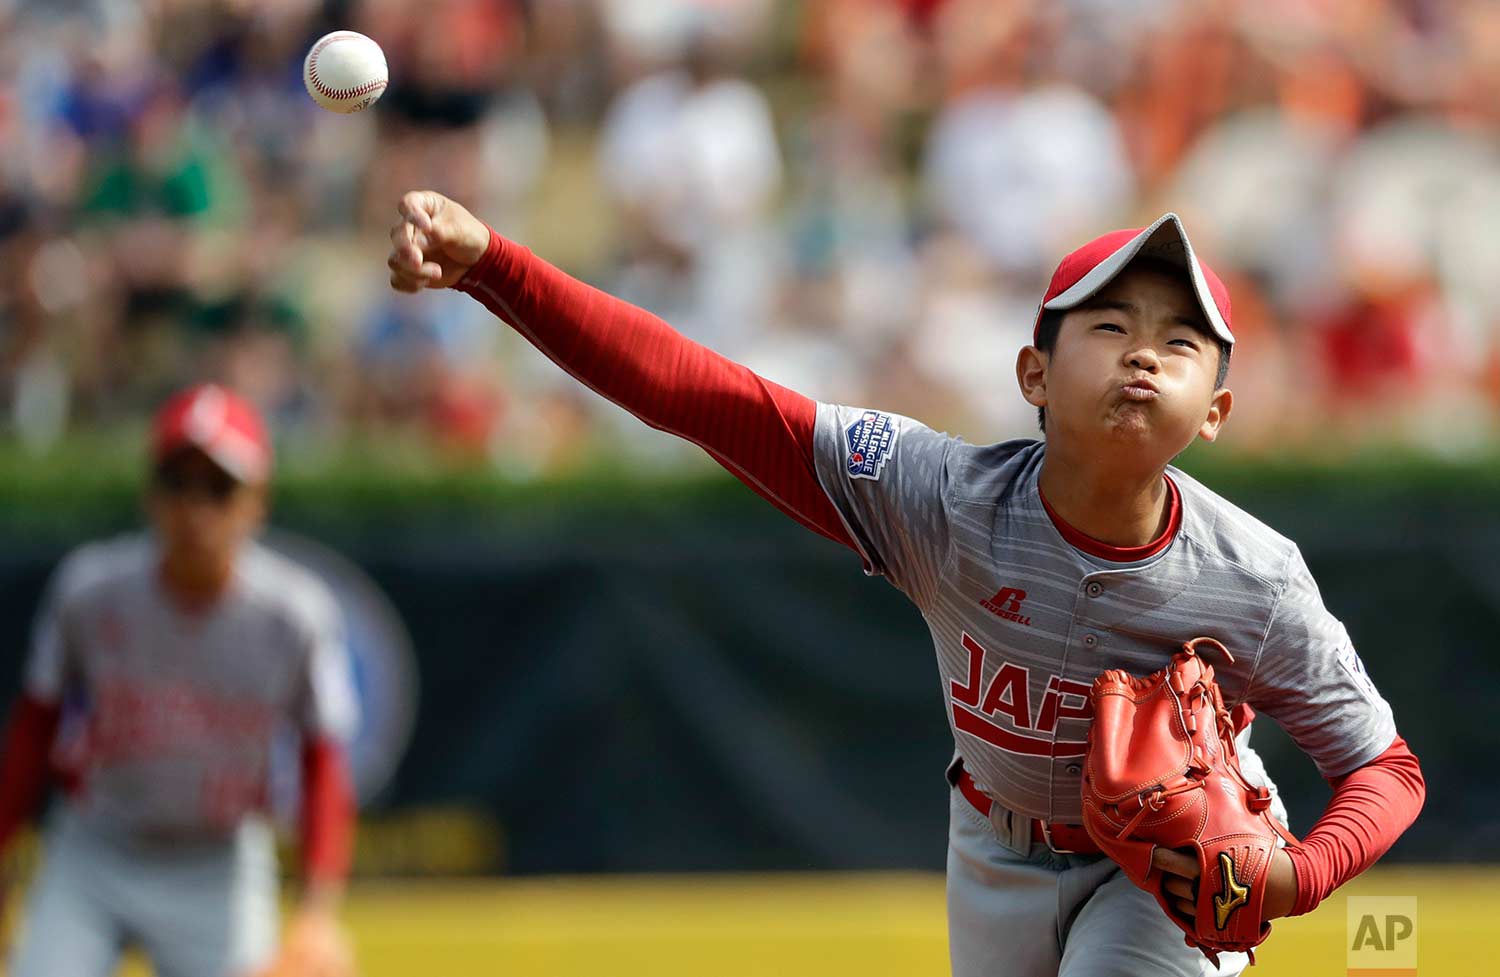  Japan's Tsubasa Tomii pitches during the first inning of Little League World Series Championship baseball game against Lufkin, Texas, Sunday, Aug. 27, 2017, in South Williamsport, Pa. (AP Photo/Matt Slocum) 